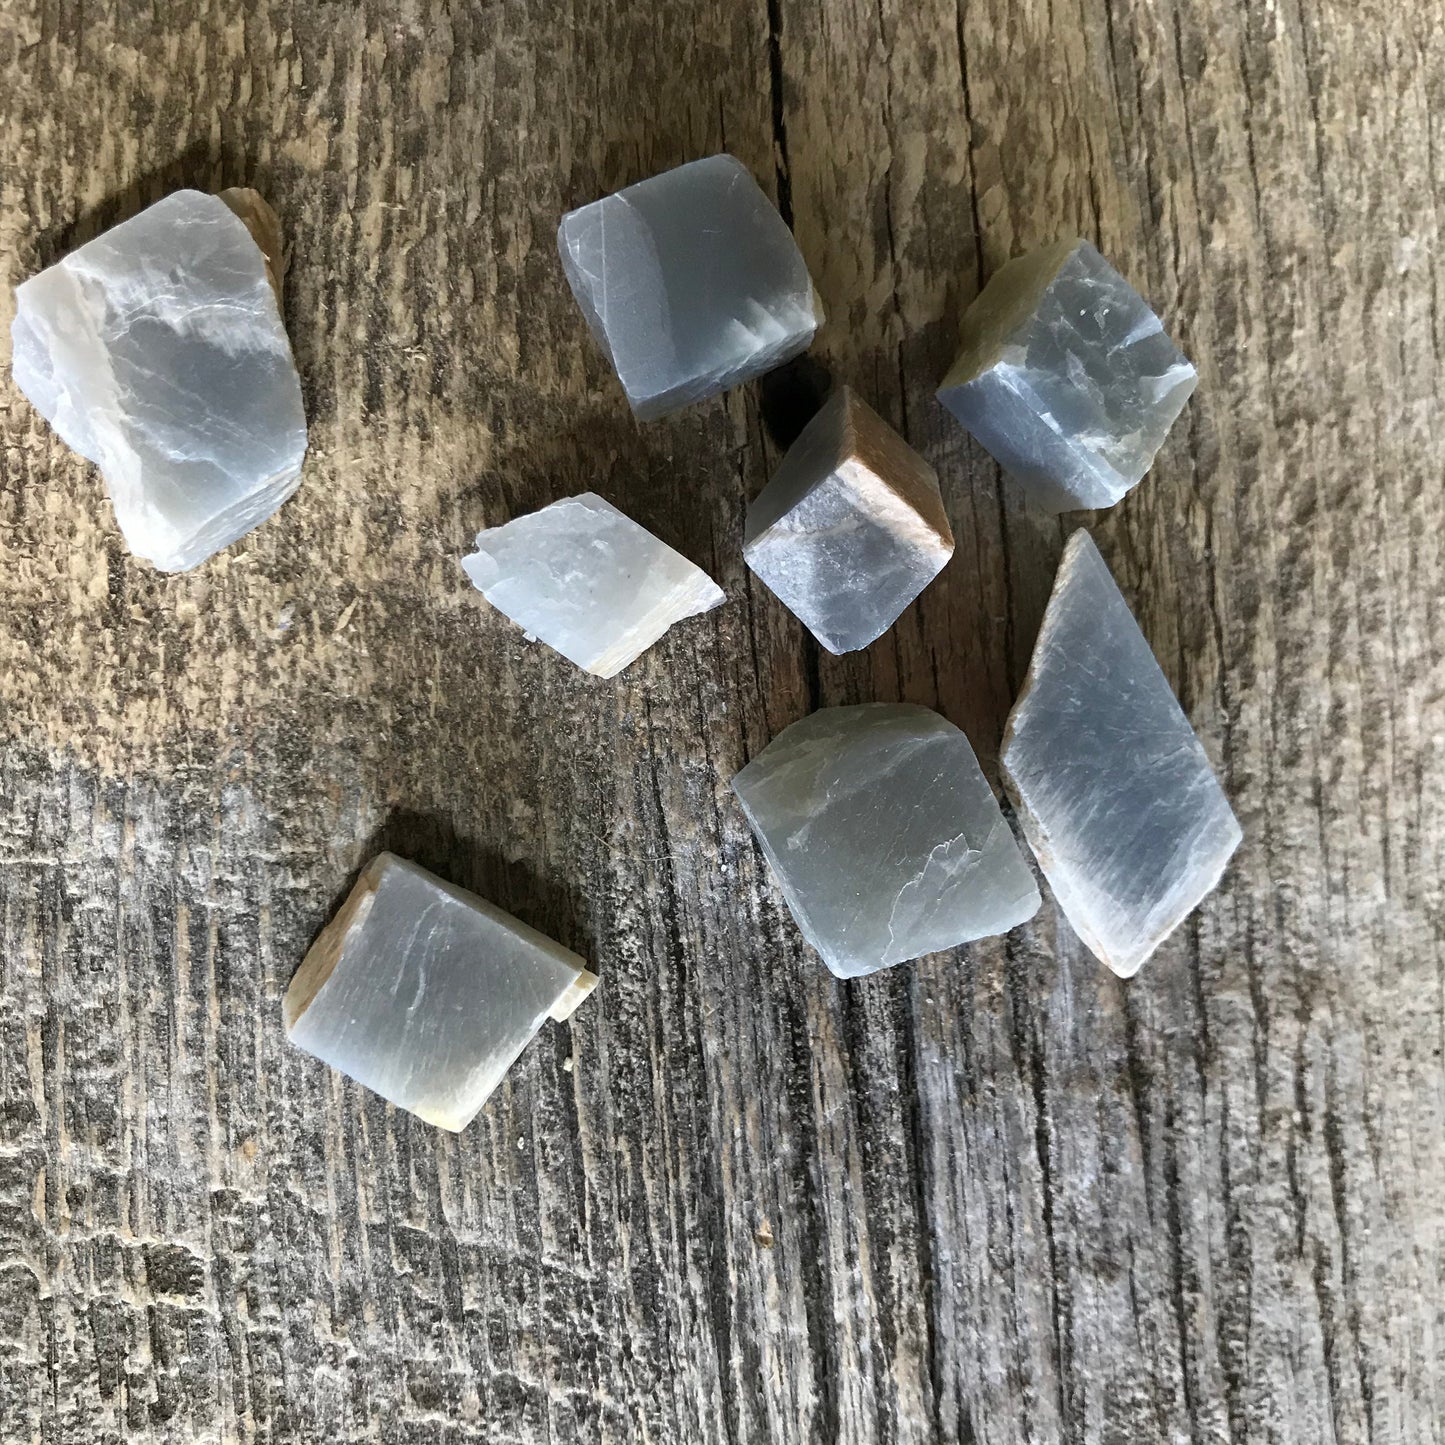 Raw Grey Moonstone, One Crystal (Approx 3/4"), Rough Stone, Supply for Crystal Grid or Crafts 1282